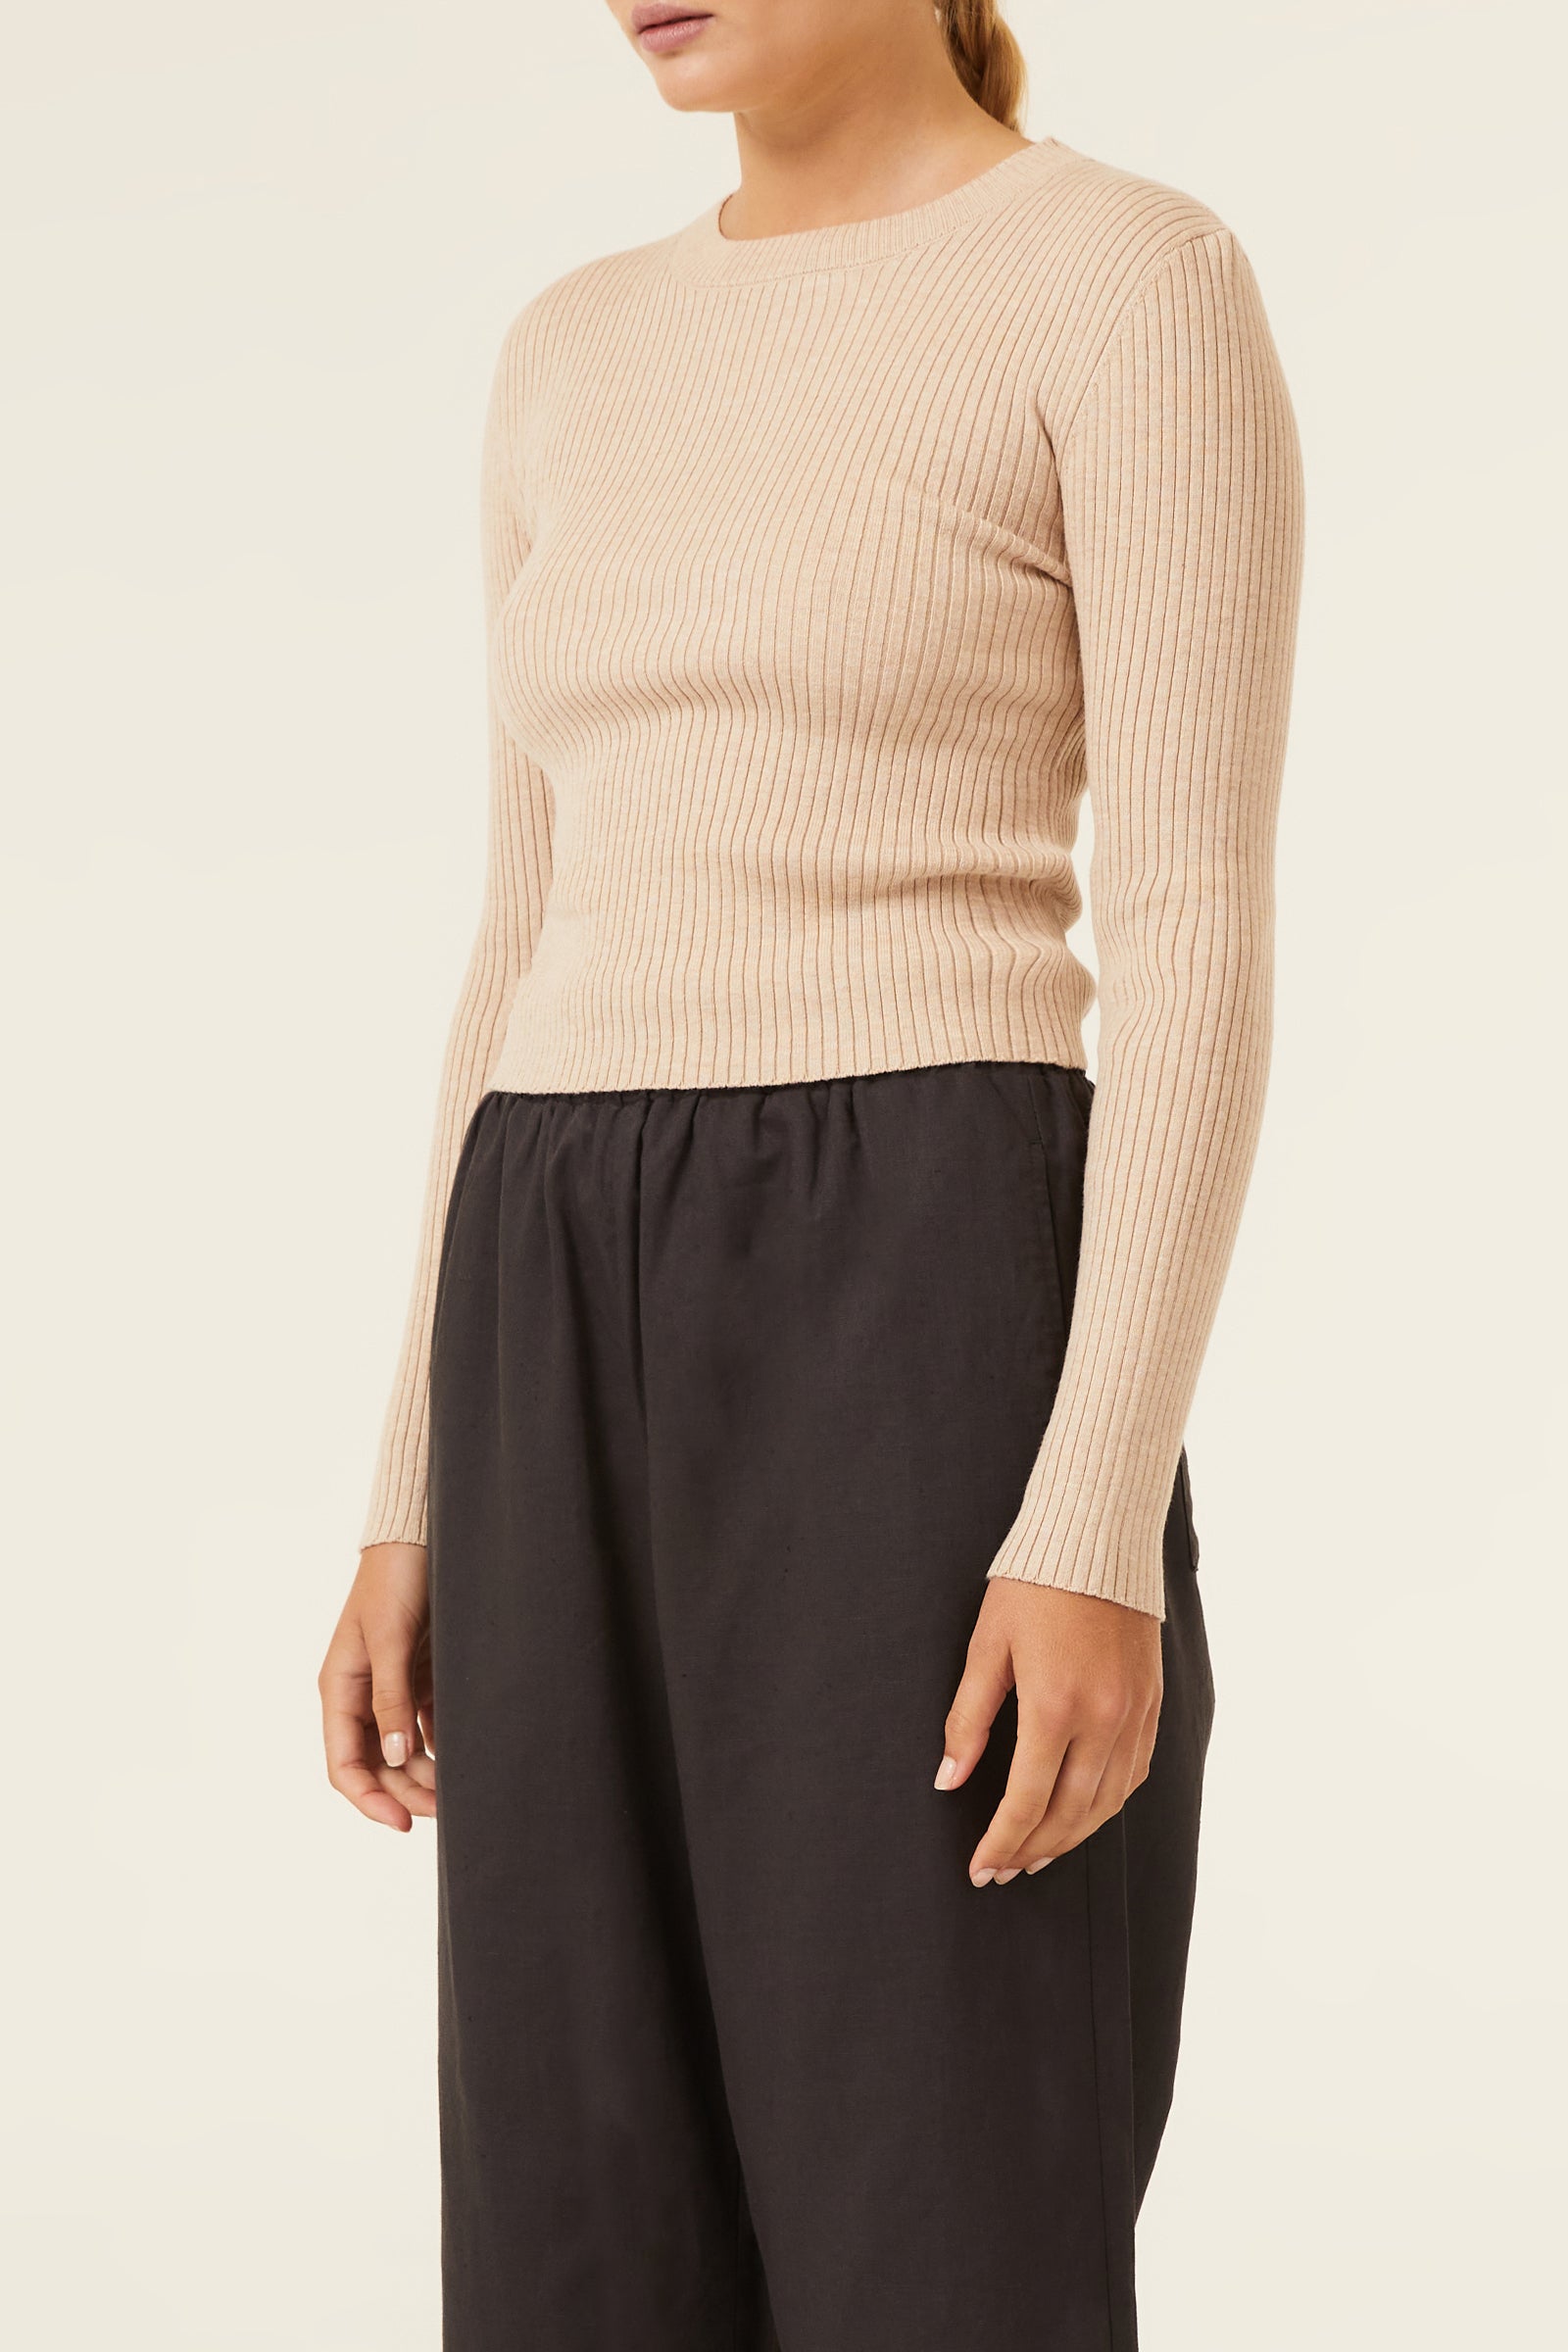 Nude Lucy Nude Classic Knit Oatmeal  